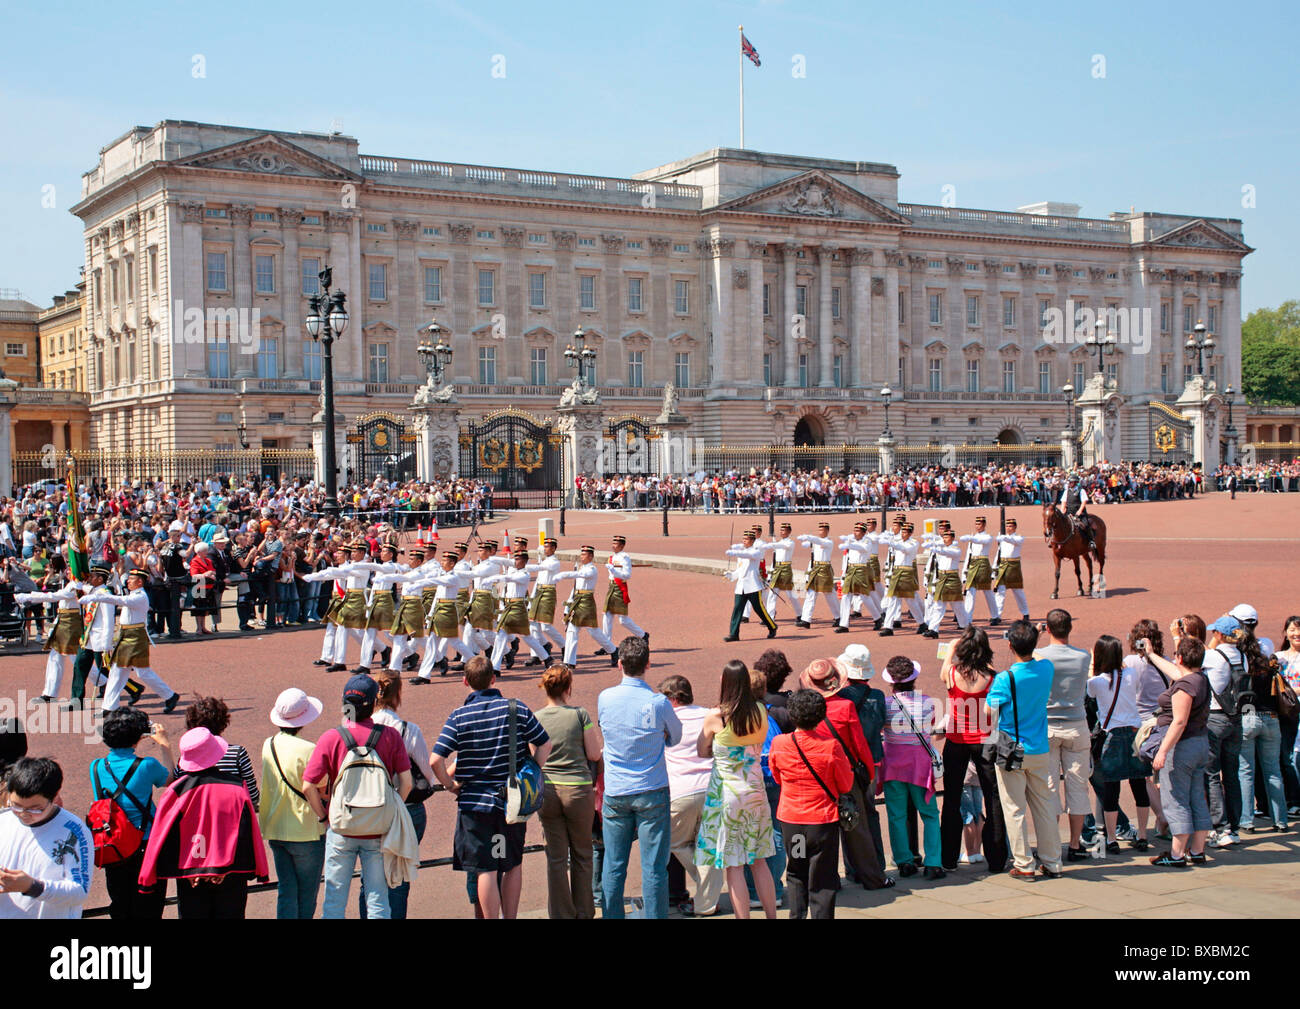 The Changing the Guard at Buckingham Palace - Nawas Travel